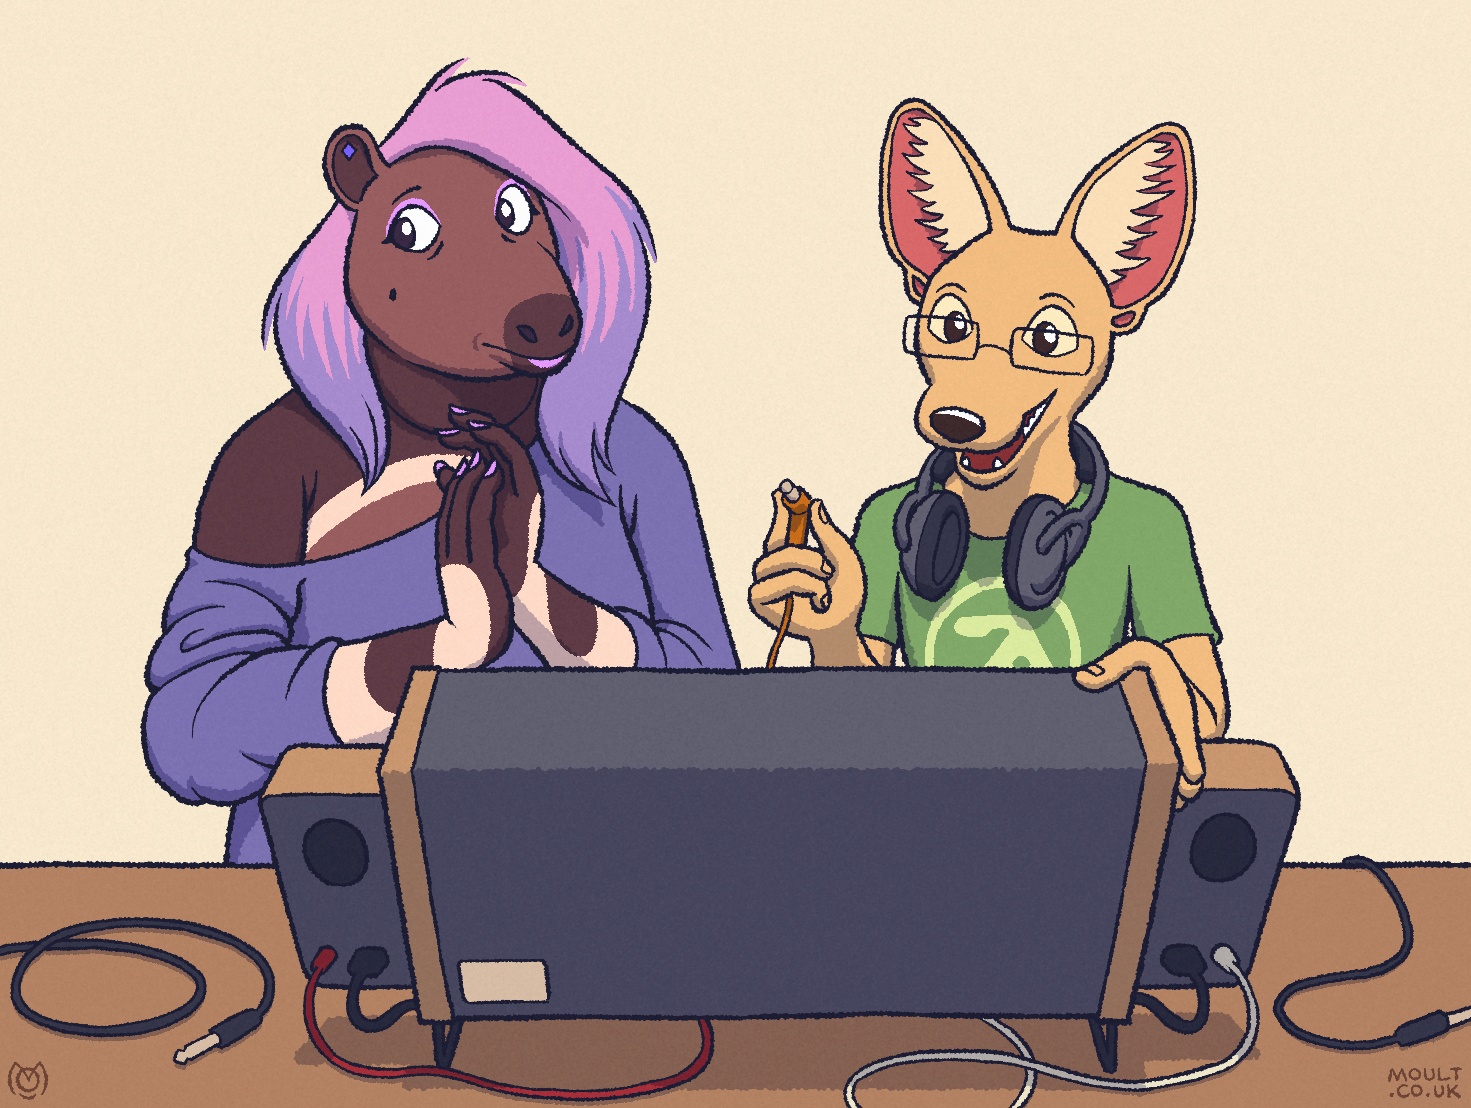 viv the giant anteater is being regaled by a fennec guy with an excited explanation of how this semi-modular synthesiser works. viv is looking as if they would rather be anywhere else